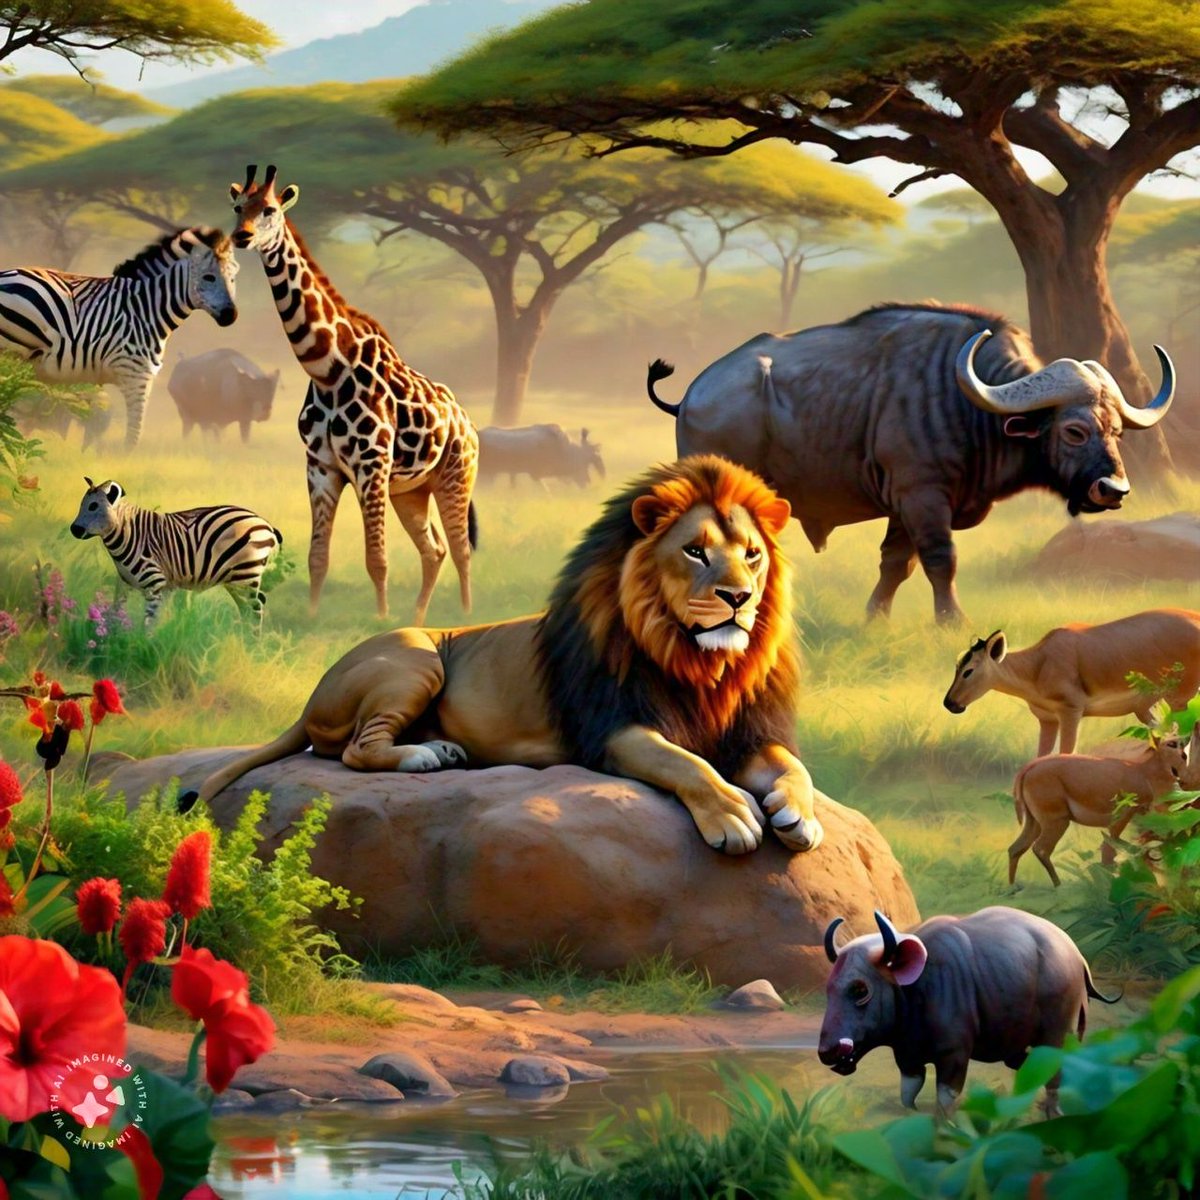 Name that wild animal you know that is missing here??
#LifeOnLand